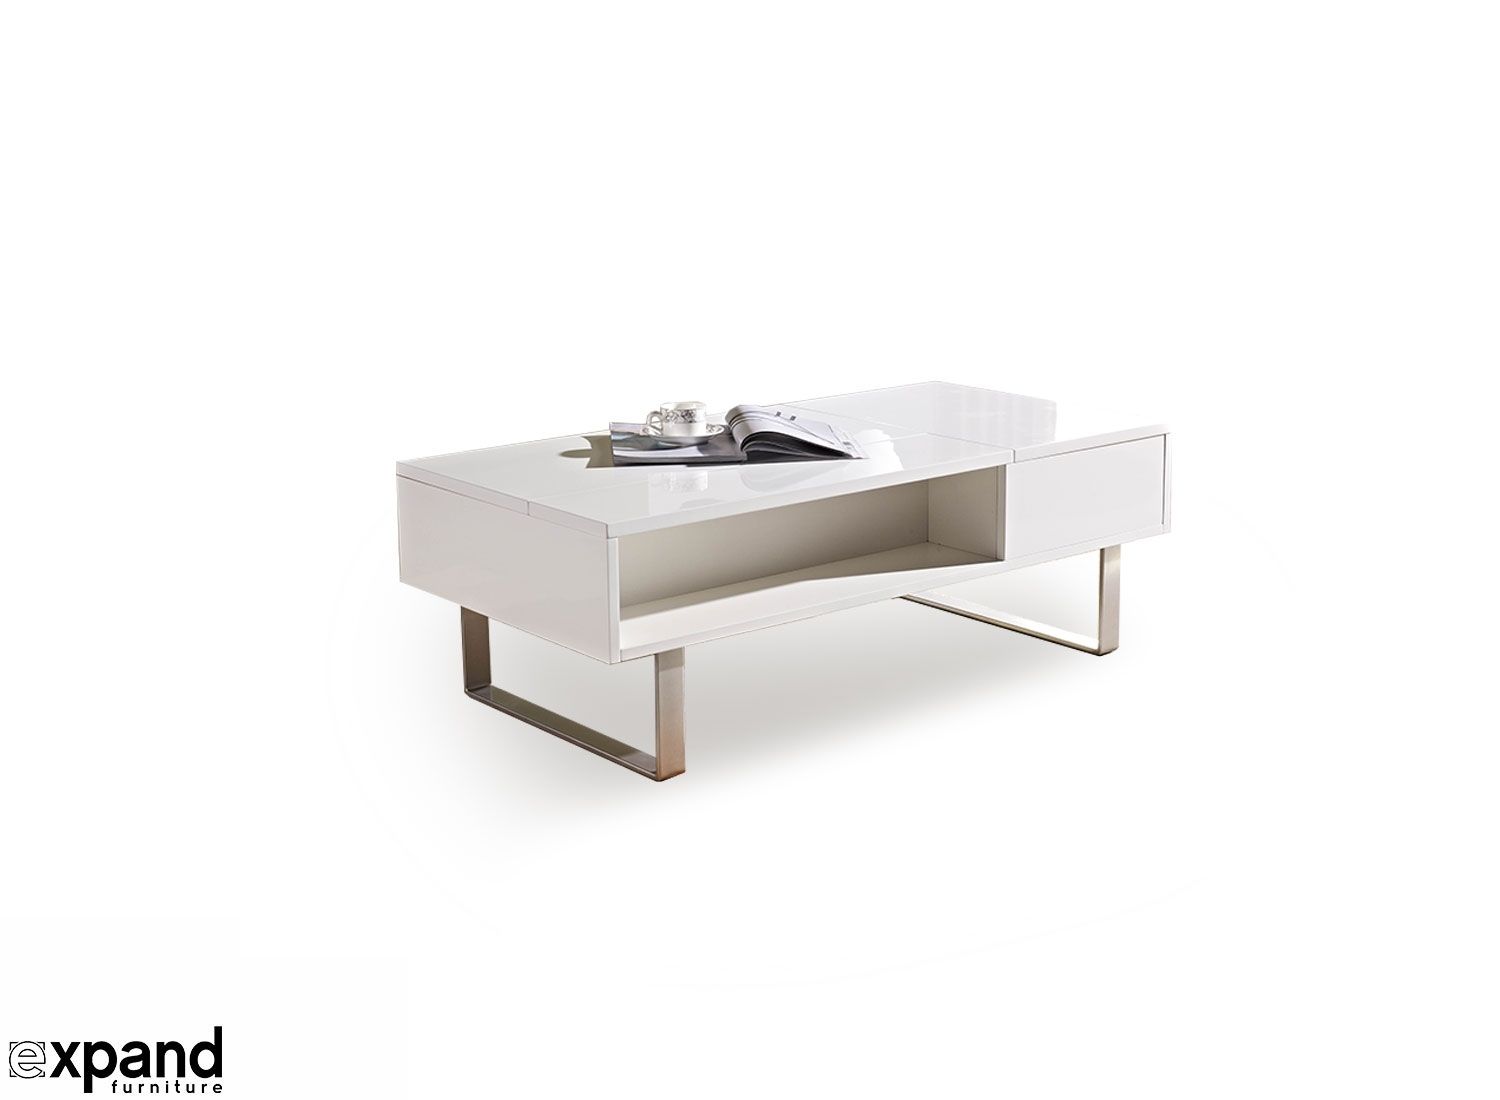 Occam Coffee Table With Lift Top | Expand Furniture Regarding Stack Hi Gloss Wood Coffee Tables (View 7 of 30)